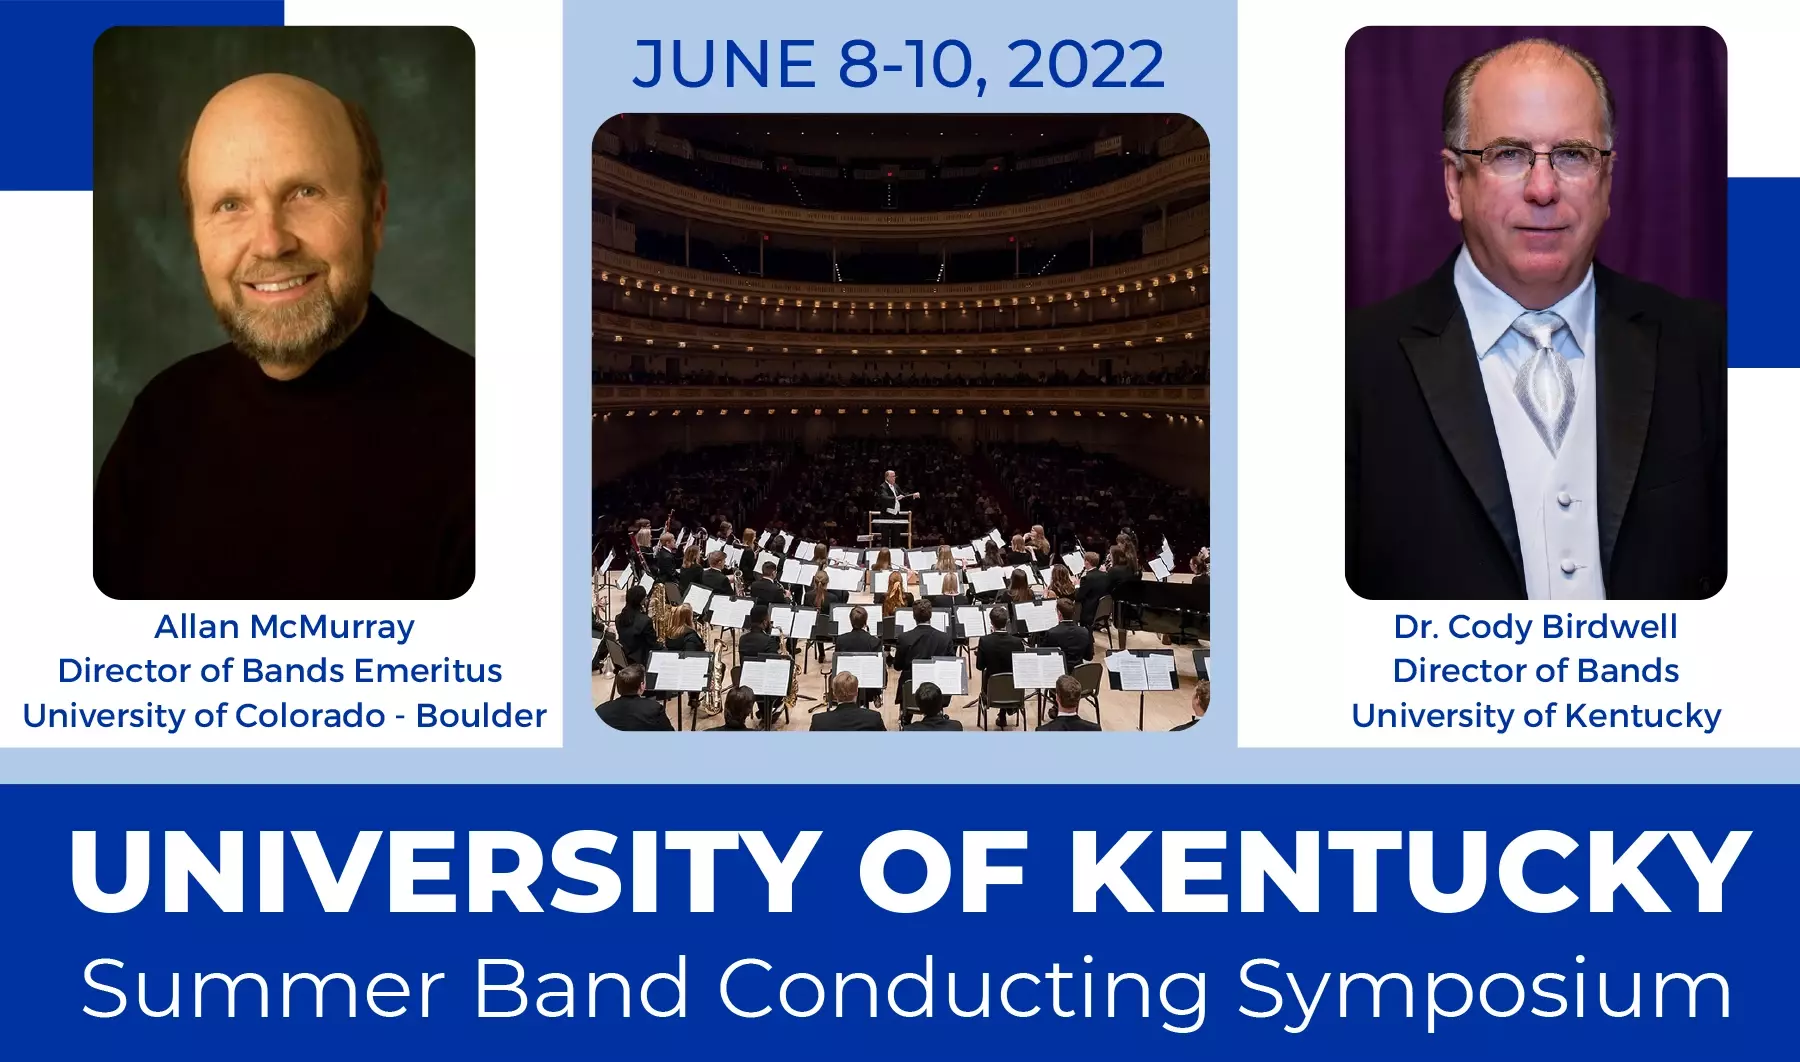 Postcard image for the 2022 Conducting Symposium. All details reproduced in text on the page.